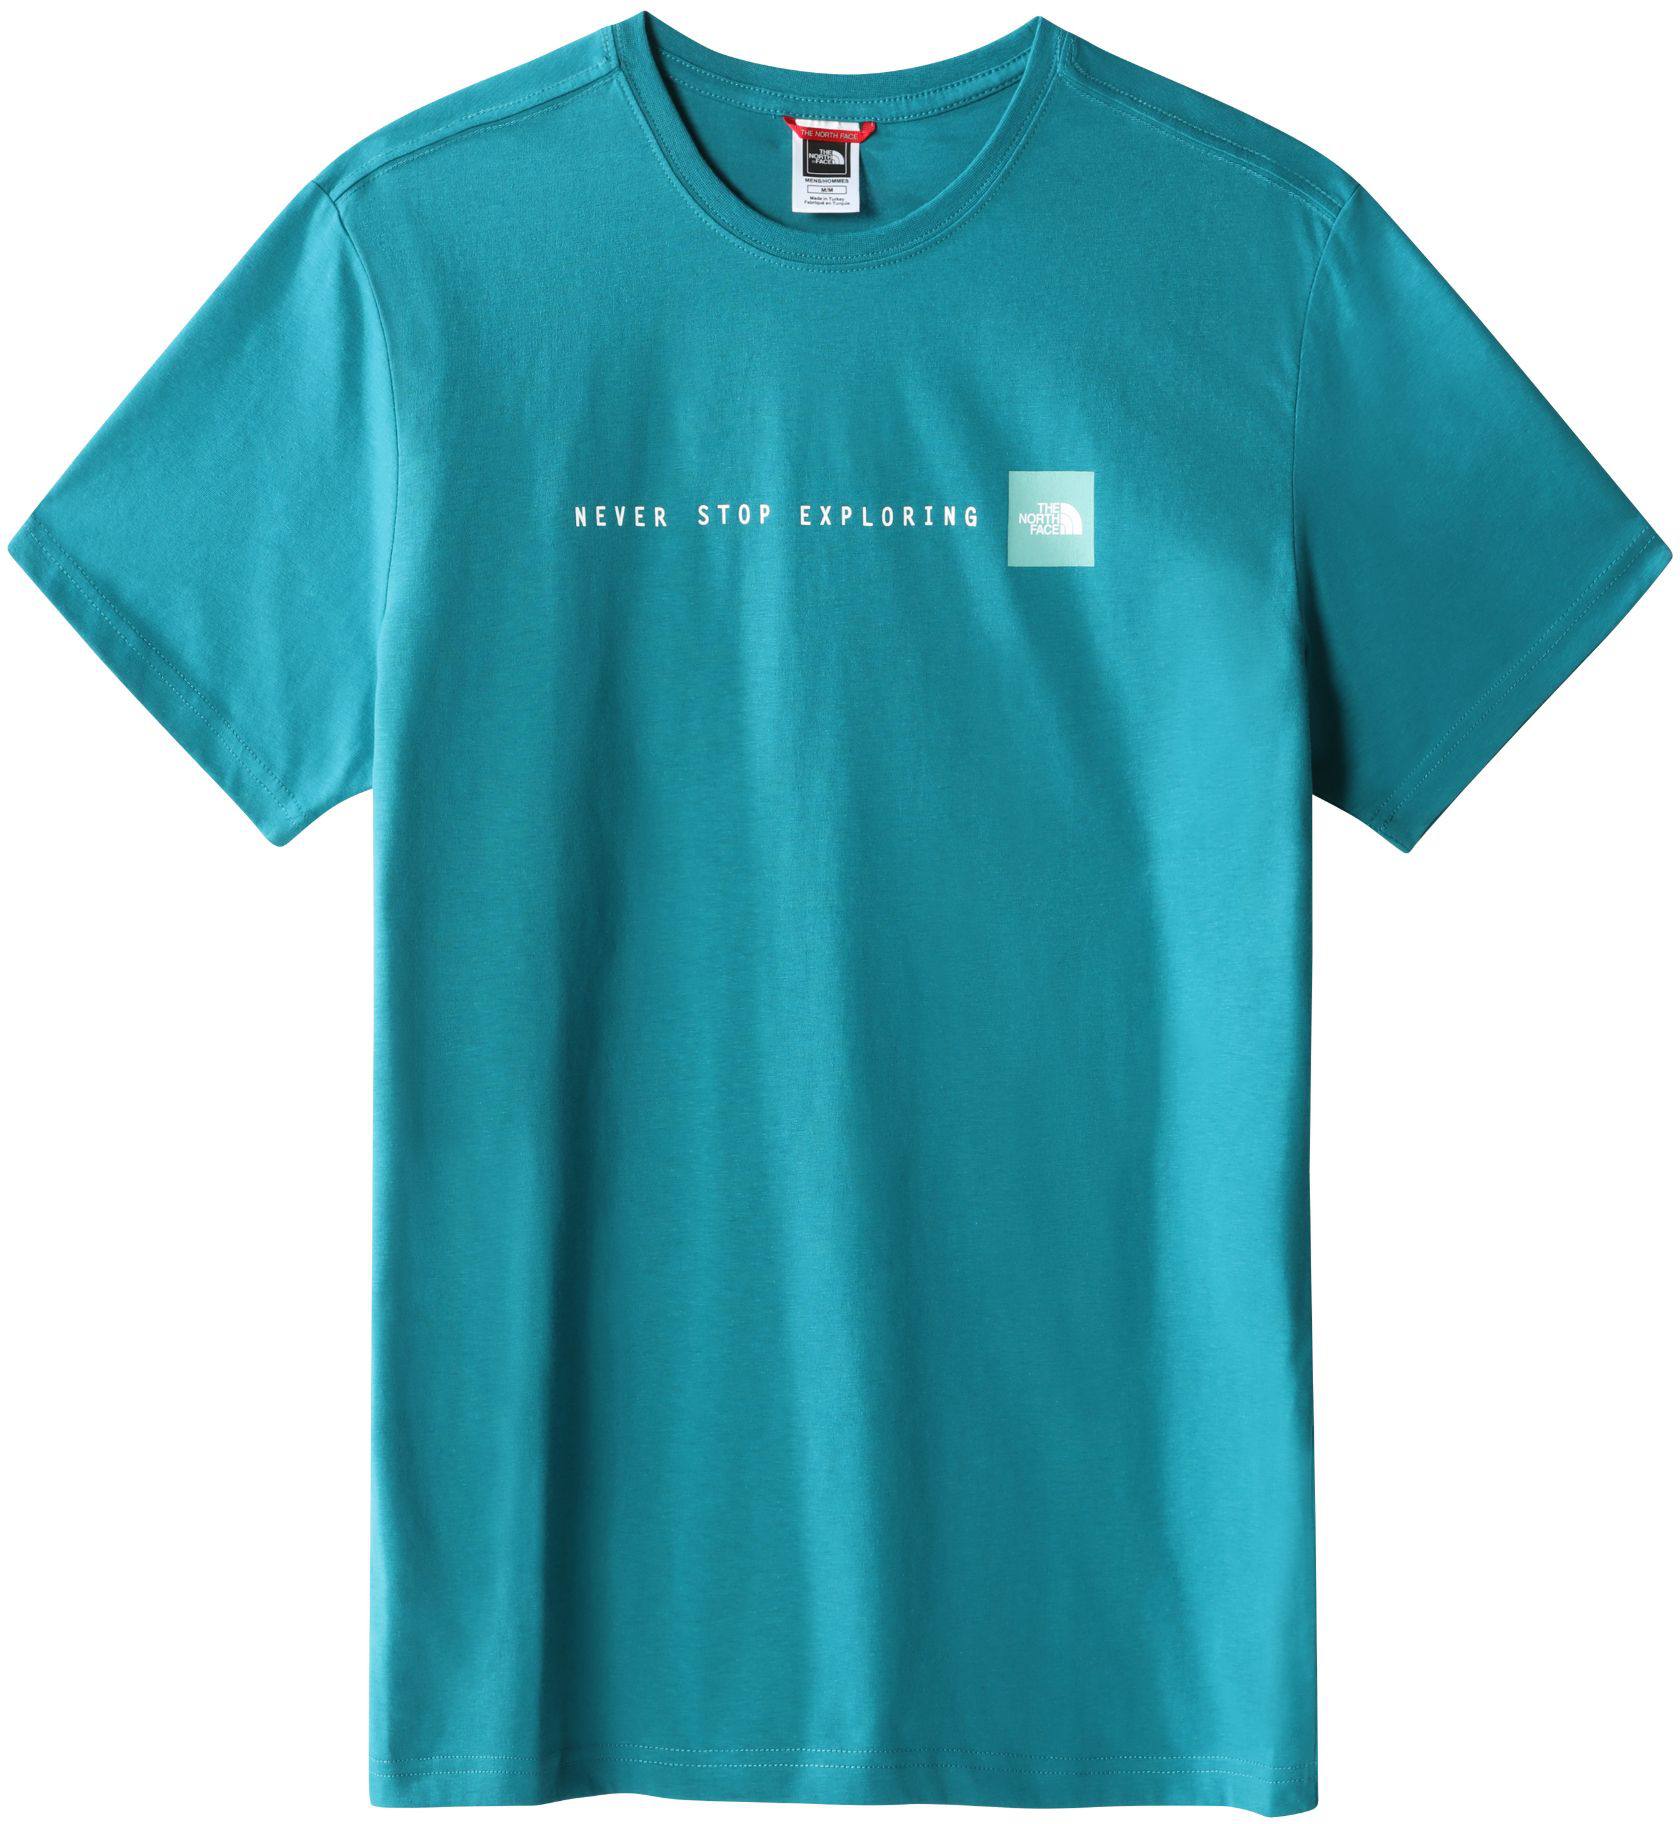 Never Stop Exploring Tee Turquoise XL